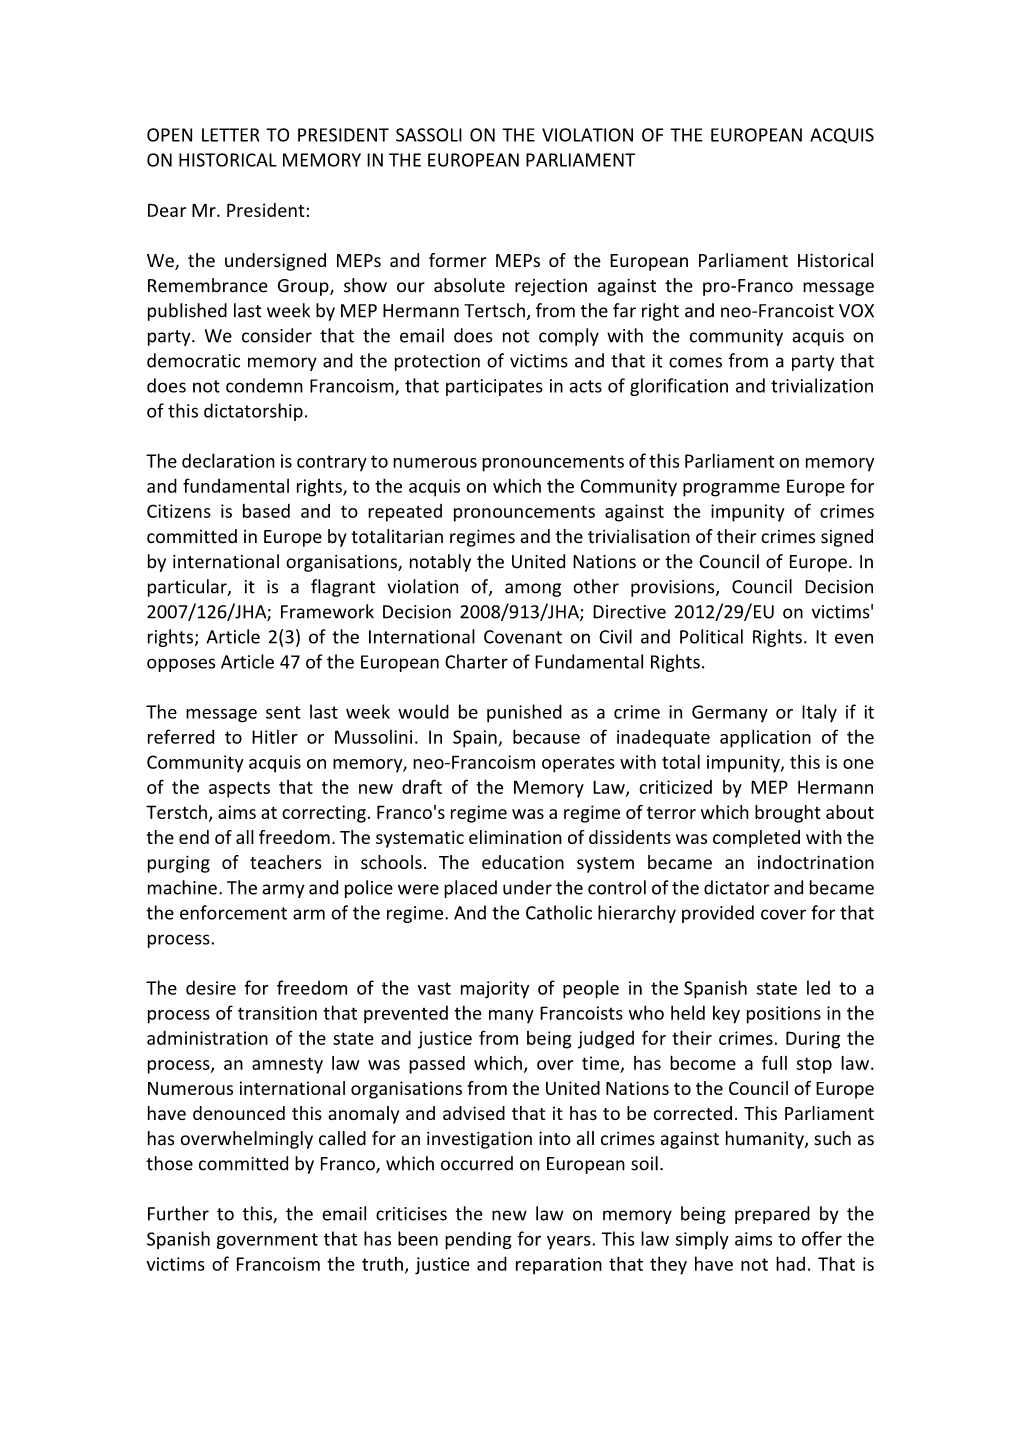 Open Letter to President Sassoli on the Violation of the European Acquis on Historical Memory in the European Parliament